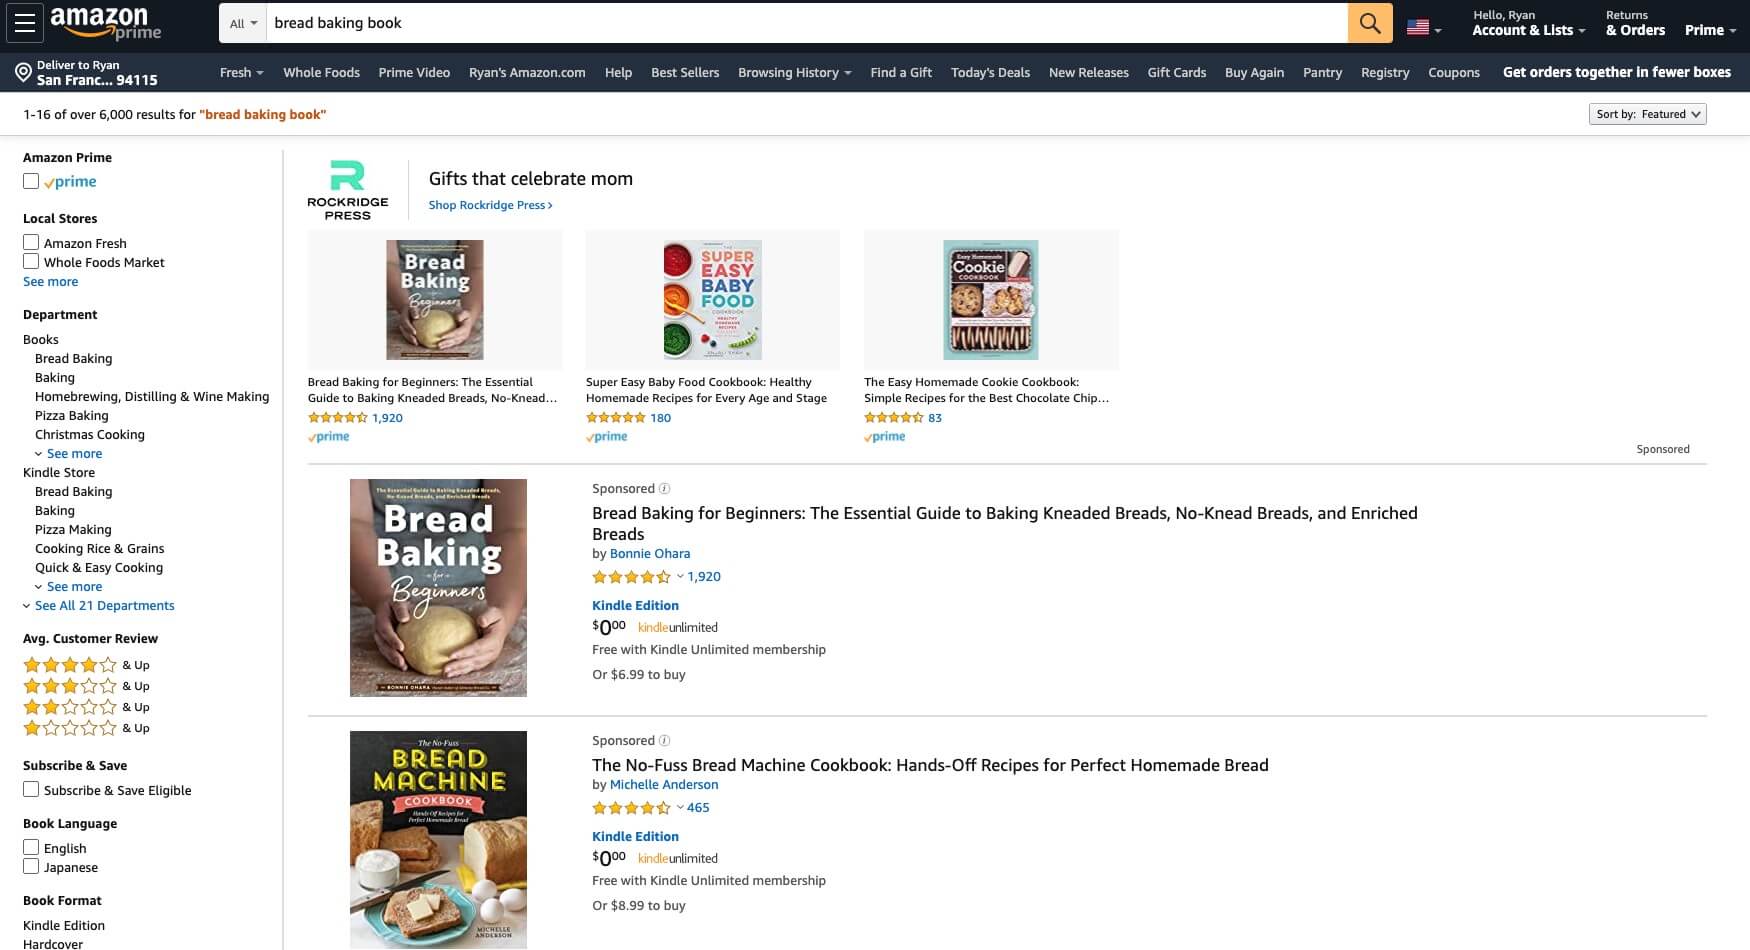 How to Sell an eBook on Amazon (Screenshot of Amazon Sales Page)